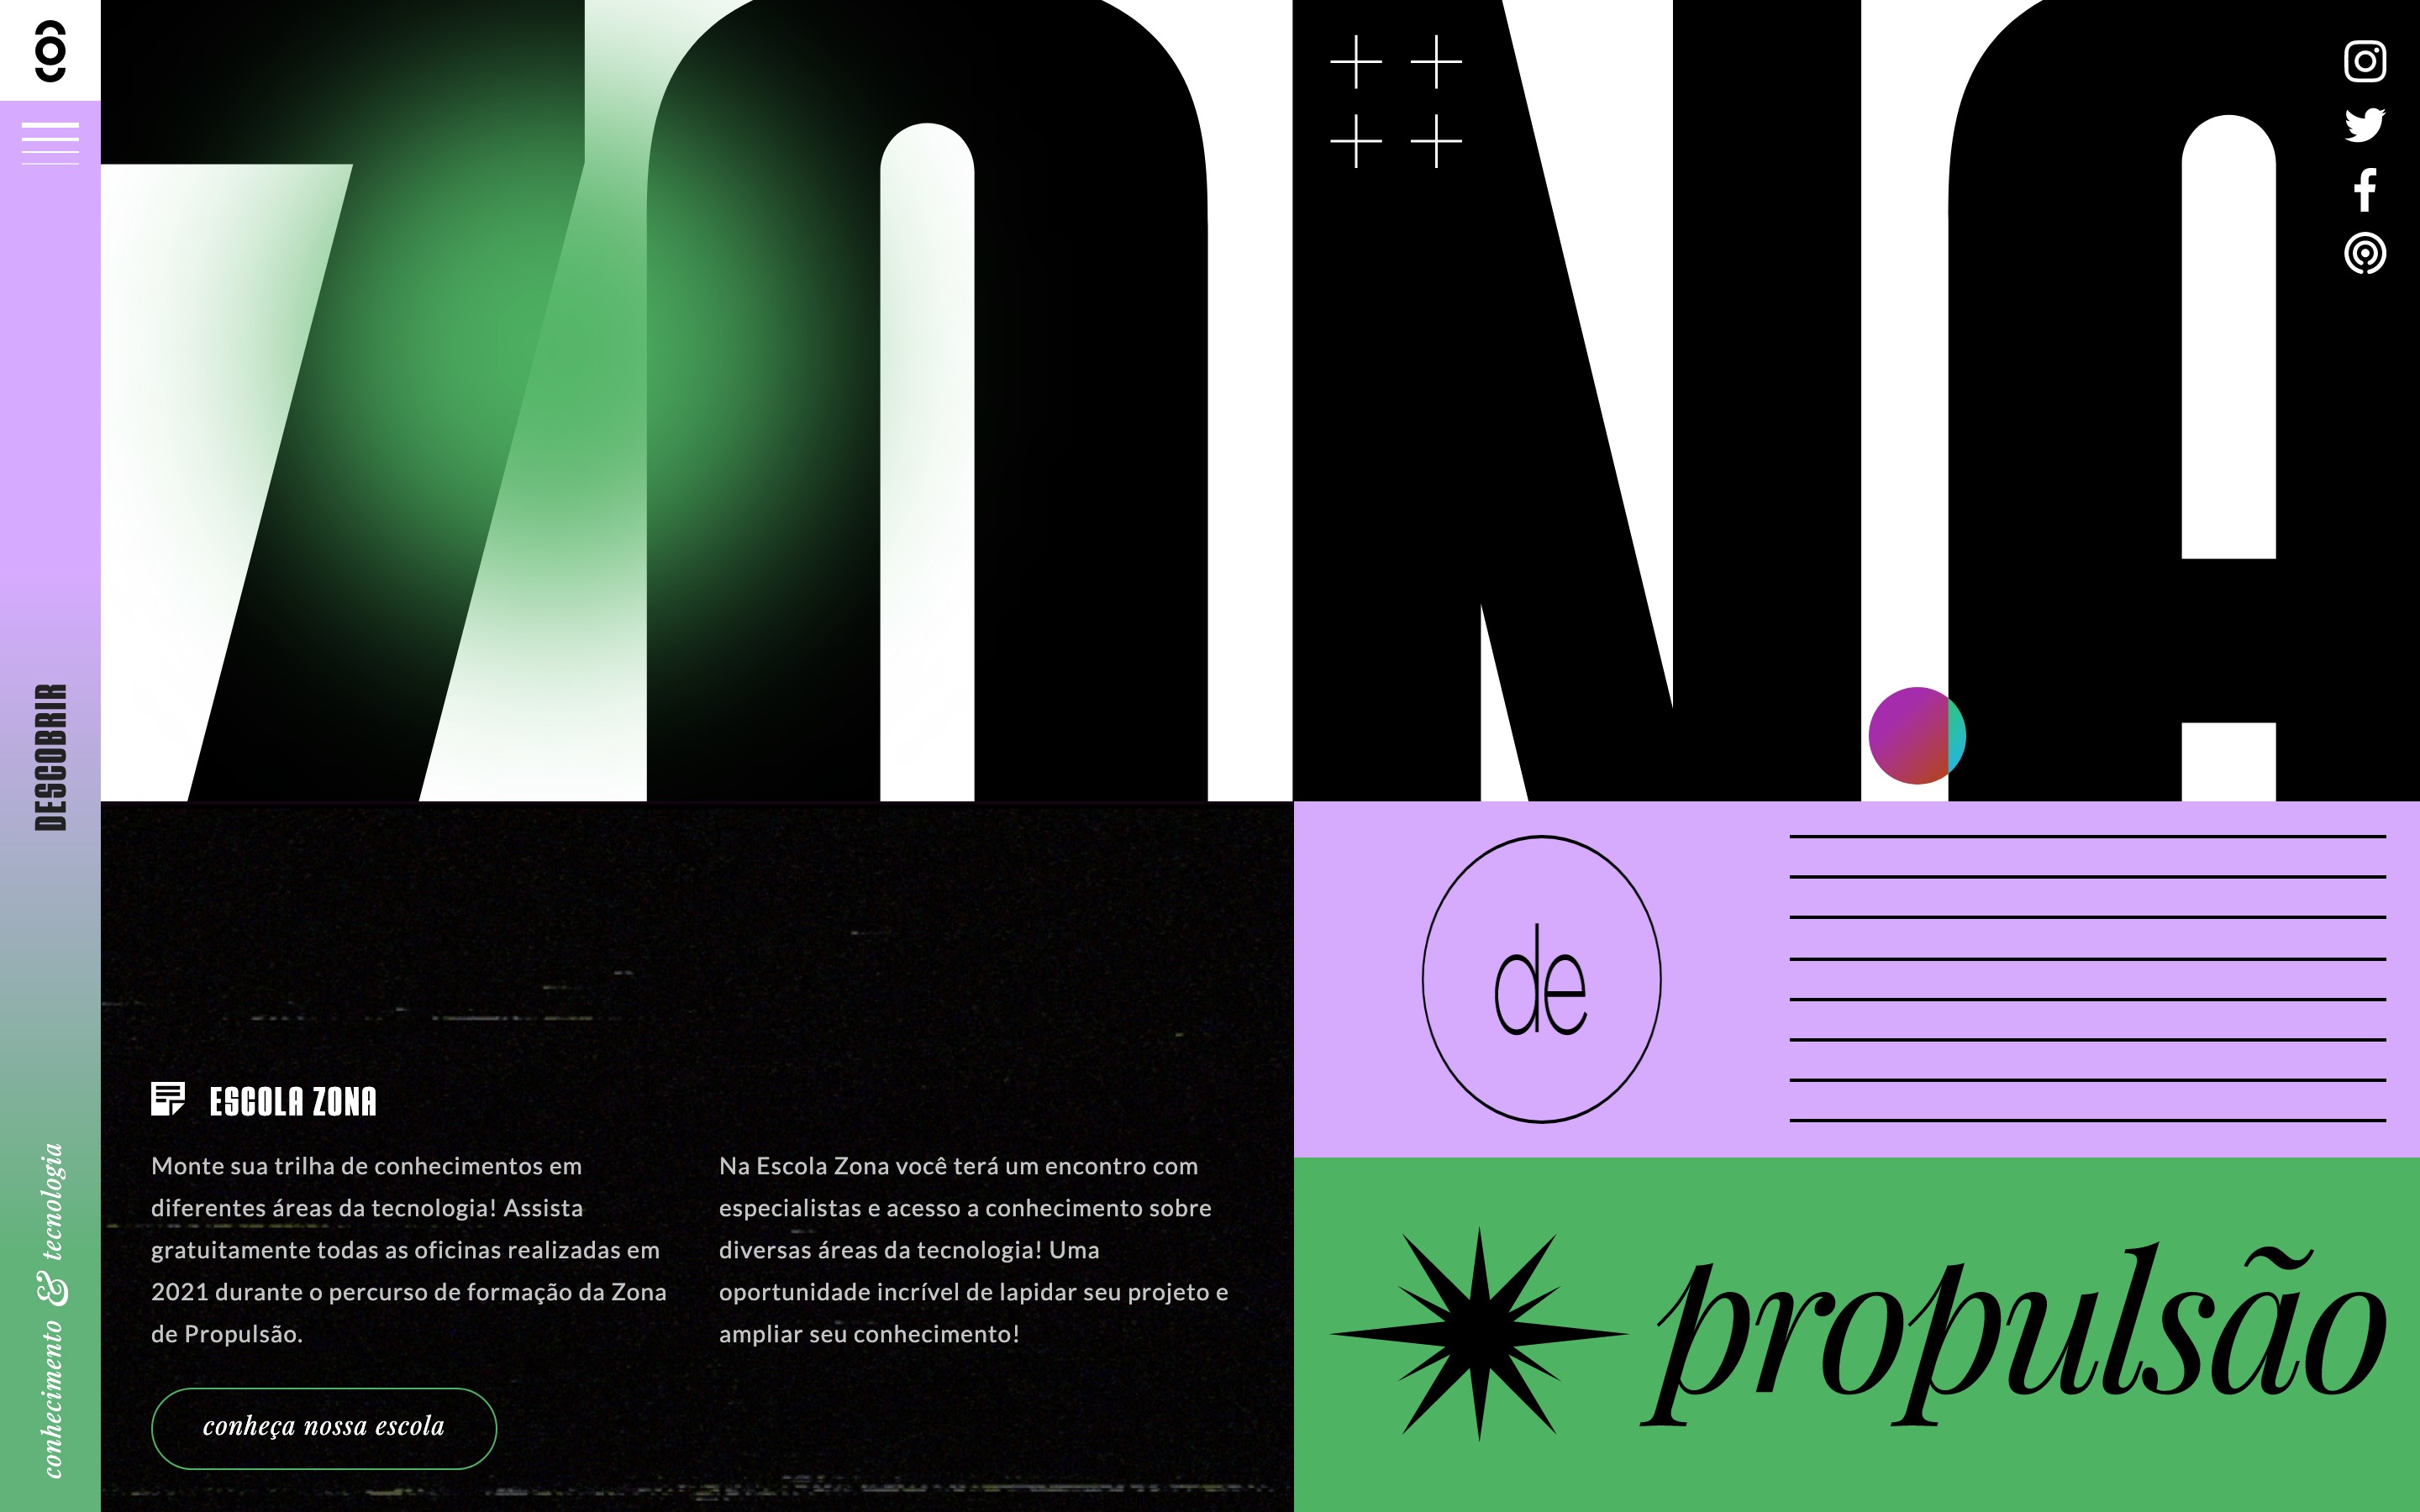 Brutalist style typographic homepage in black, neon green and purple.